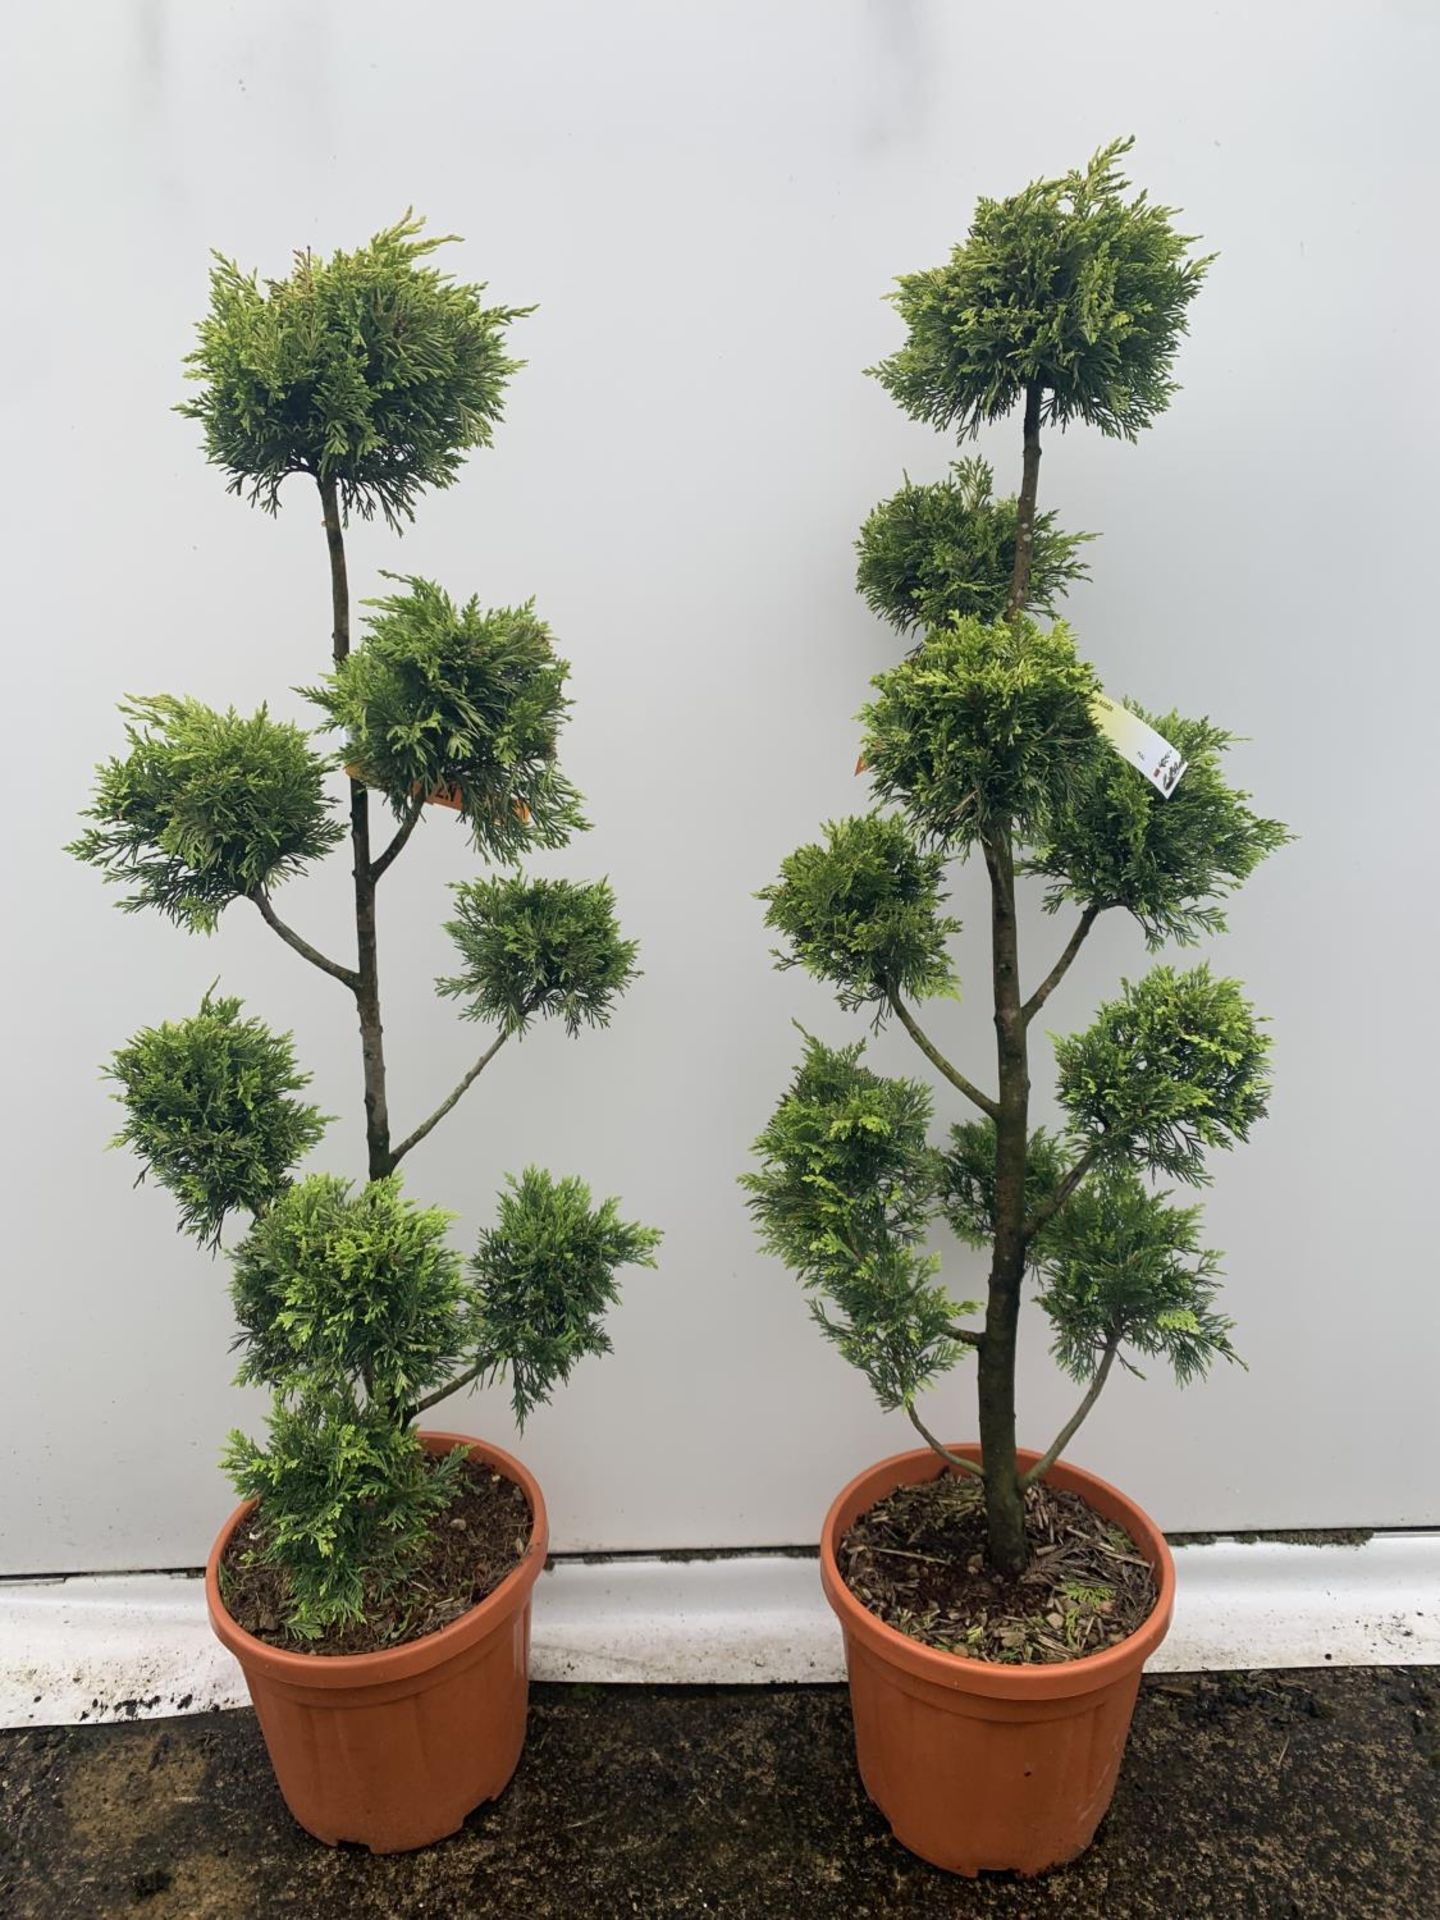 TWO POM POM TREES CUPRESSOCYPARIS LEYLANDII 'GOLD RIDER' APPROX 160CM IN HEIGHT IN 15 LTR POTS - Image 3 of 5